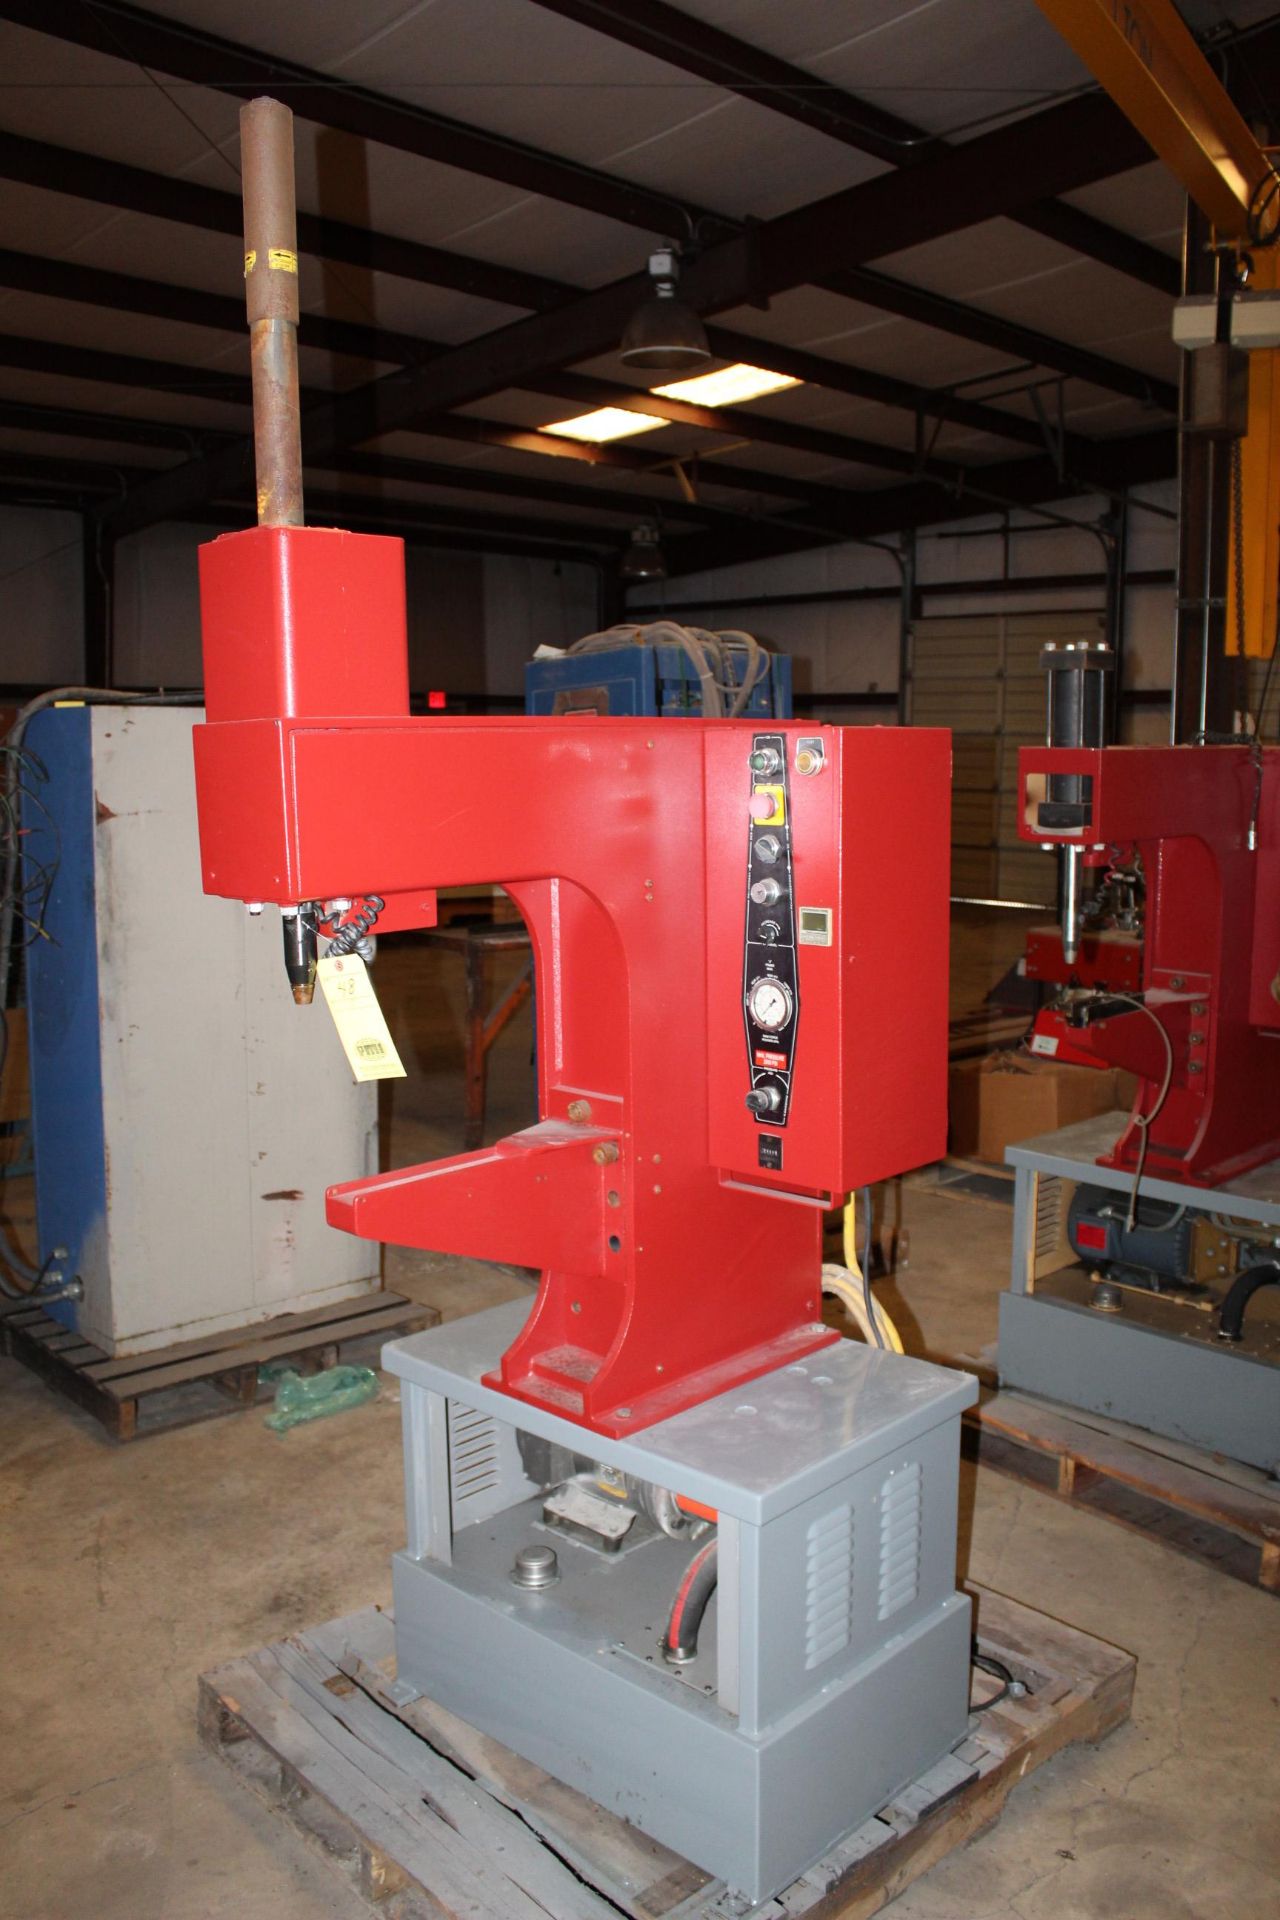 INSERTION PRESS, 6 T. cap. (Located at: Accurate, Inc., 1200 East 4th Street, Taylor, TX 76574)